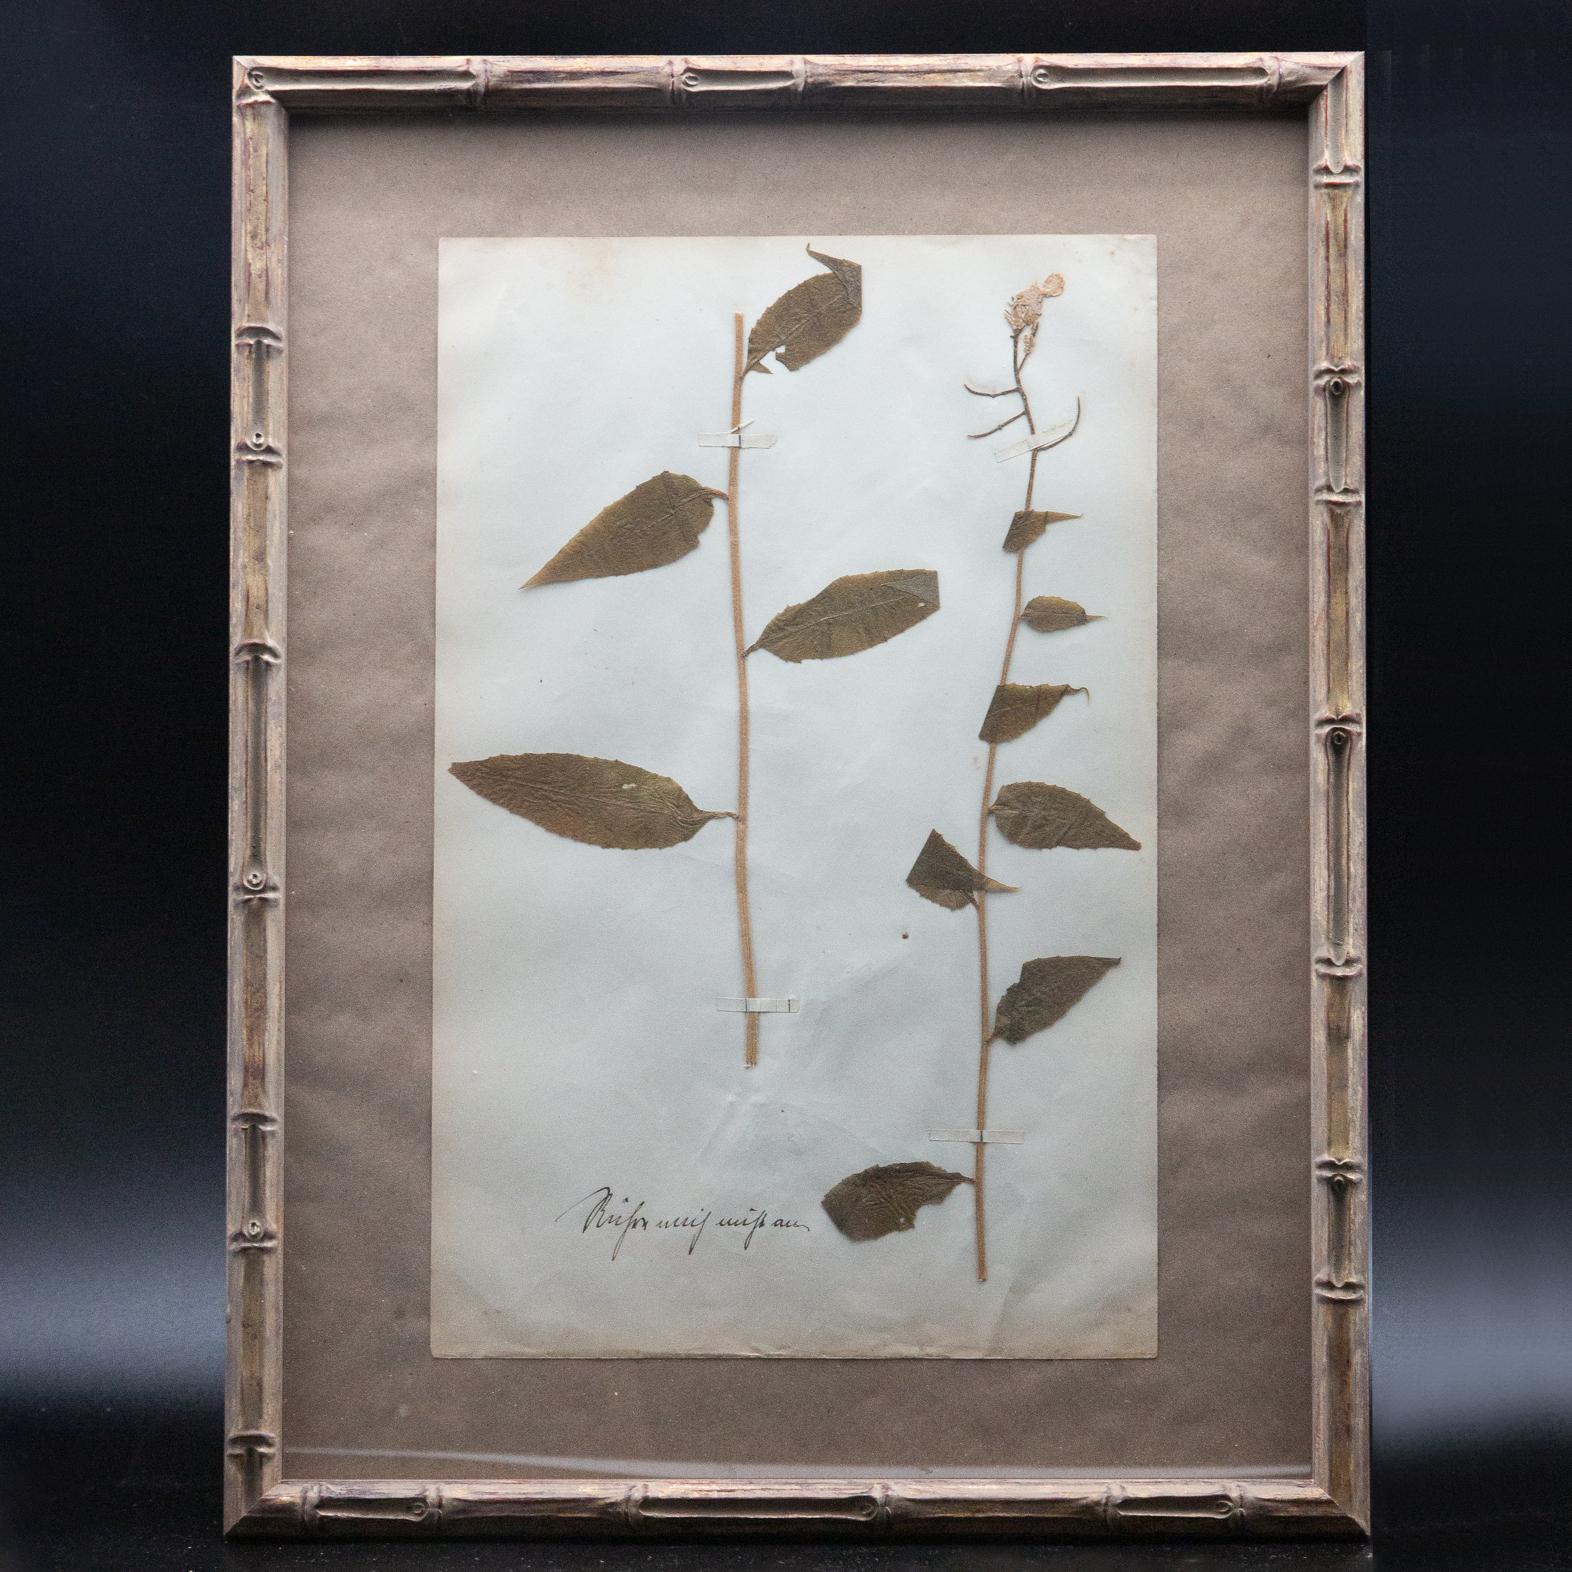 Four framed and pressed plants from a collection of botanical pressings purchased in France. In the late 19th century collecting and pressing plants was all the rage for affluent Europeans. These collectors spent hours drying, pressing and mounting